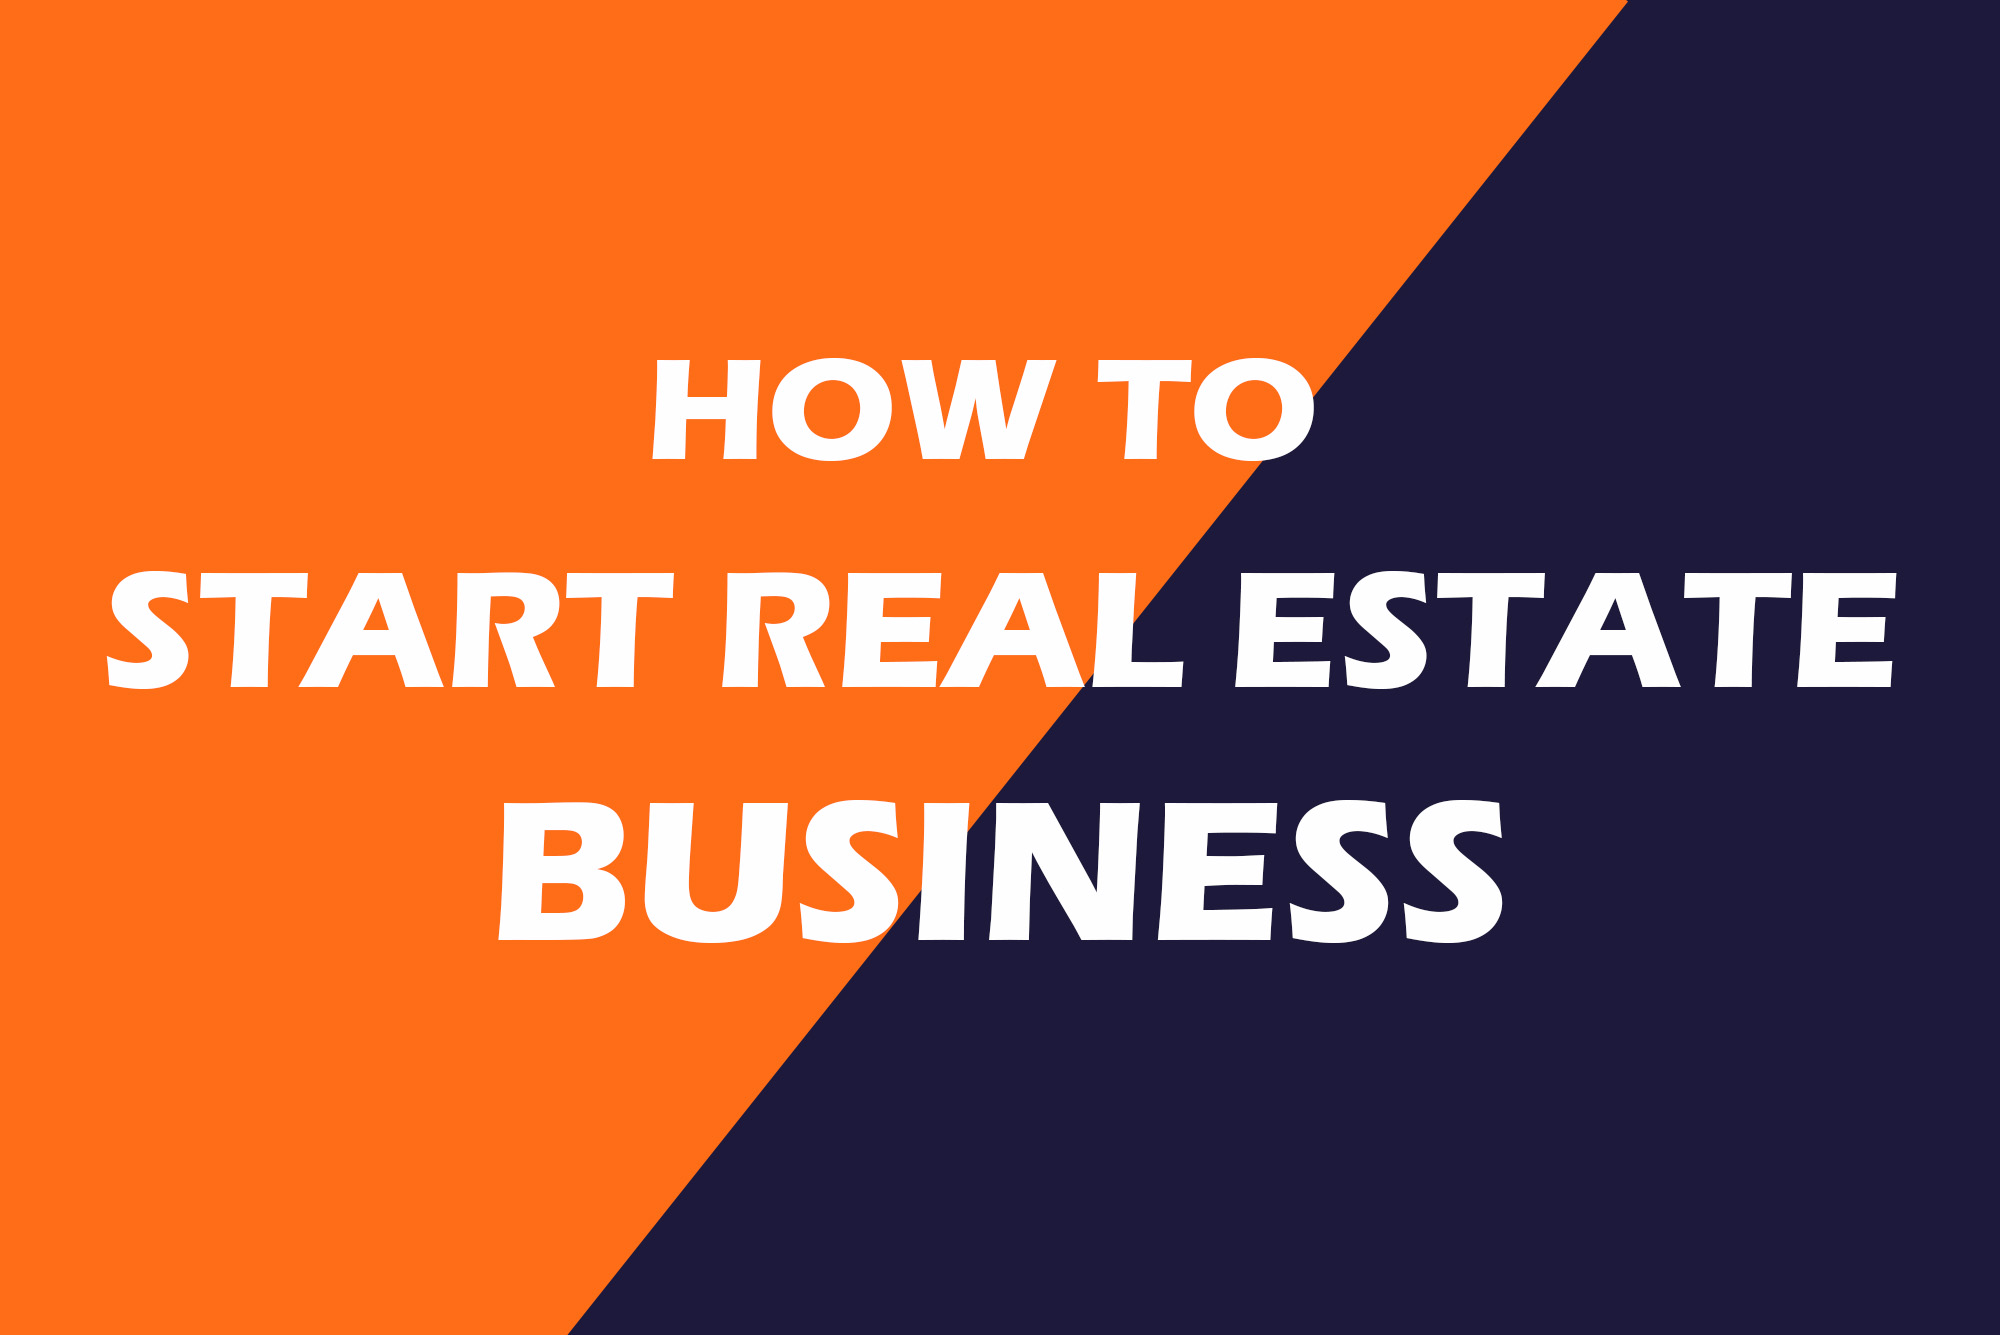 How to Start Real Estate Business